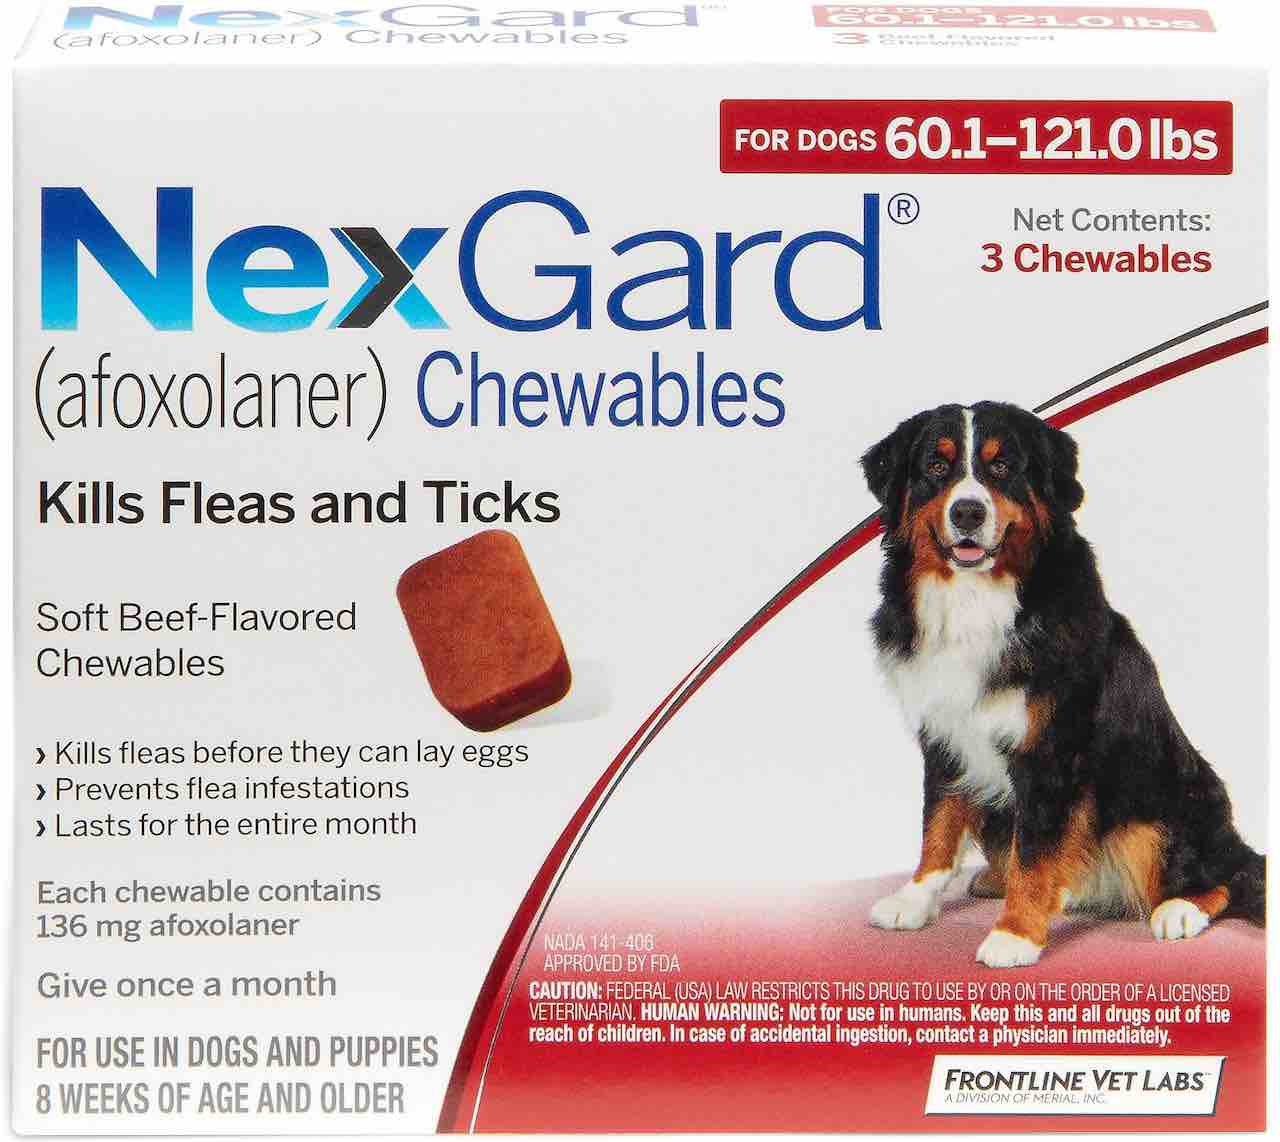 NexGard 3 chewables for dogs 60.1-121 lbs (Red) 1